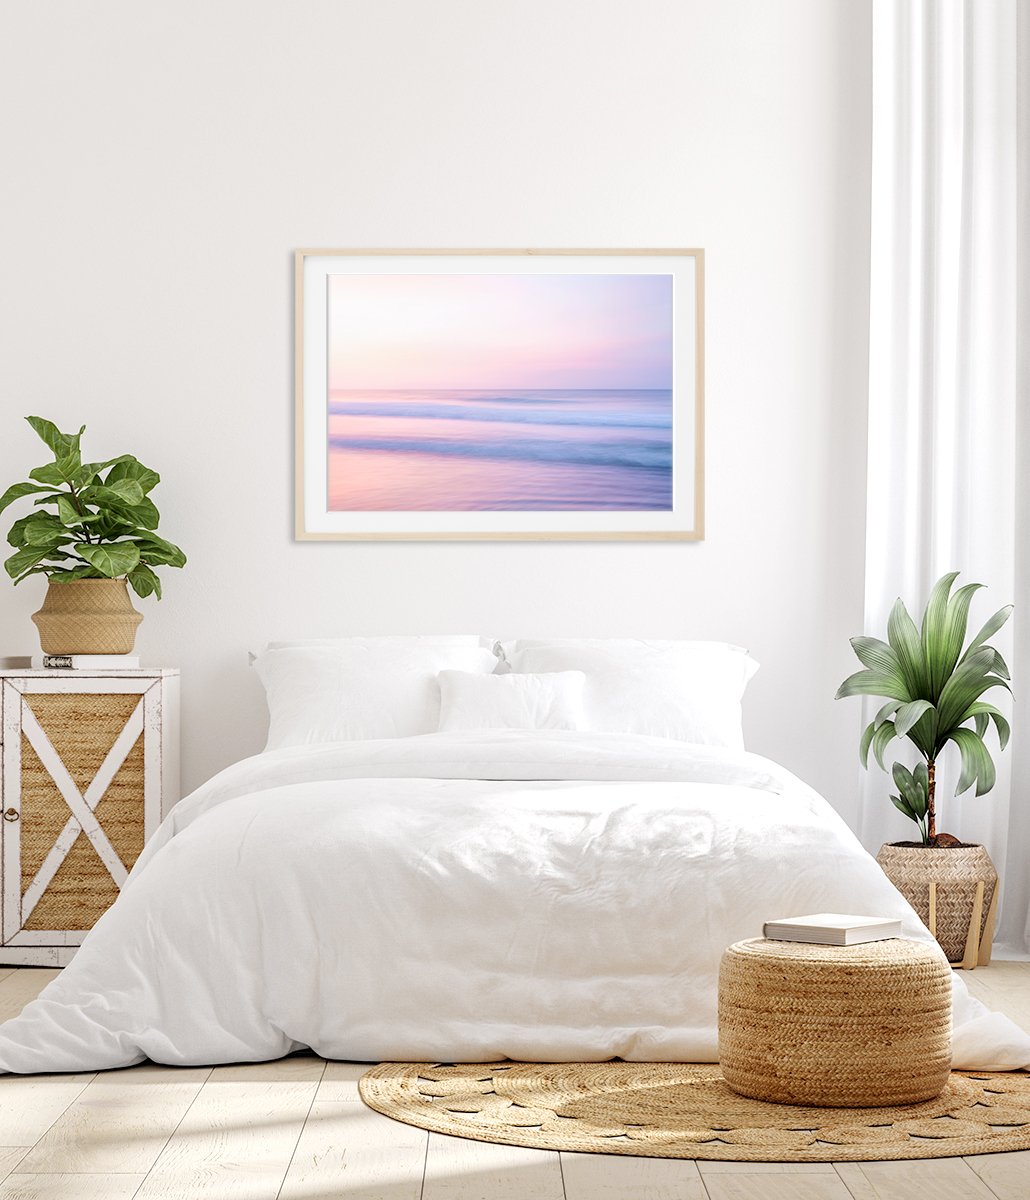 bright white bedroom decor, calming pastel pink minimal sunrise beach photograph by Wright and Roam